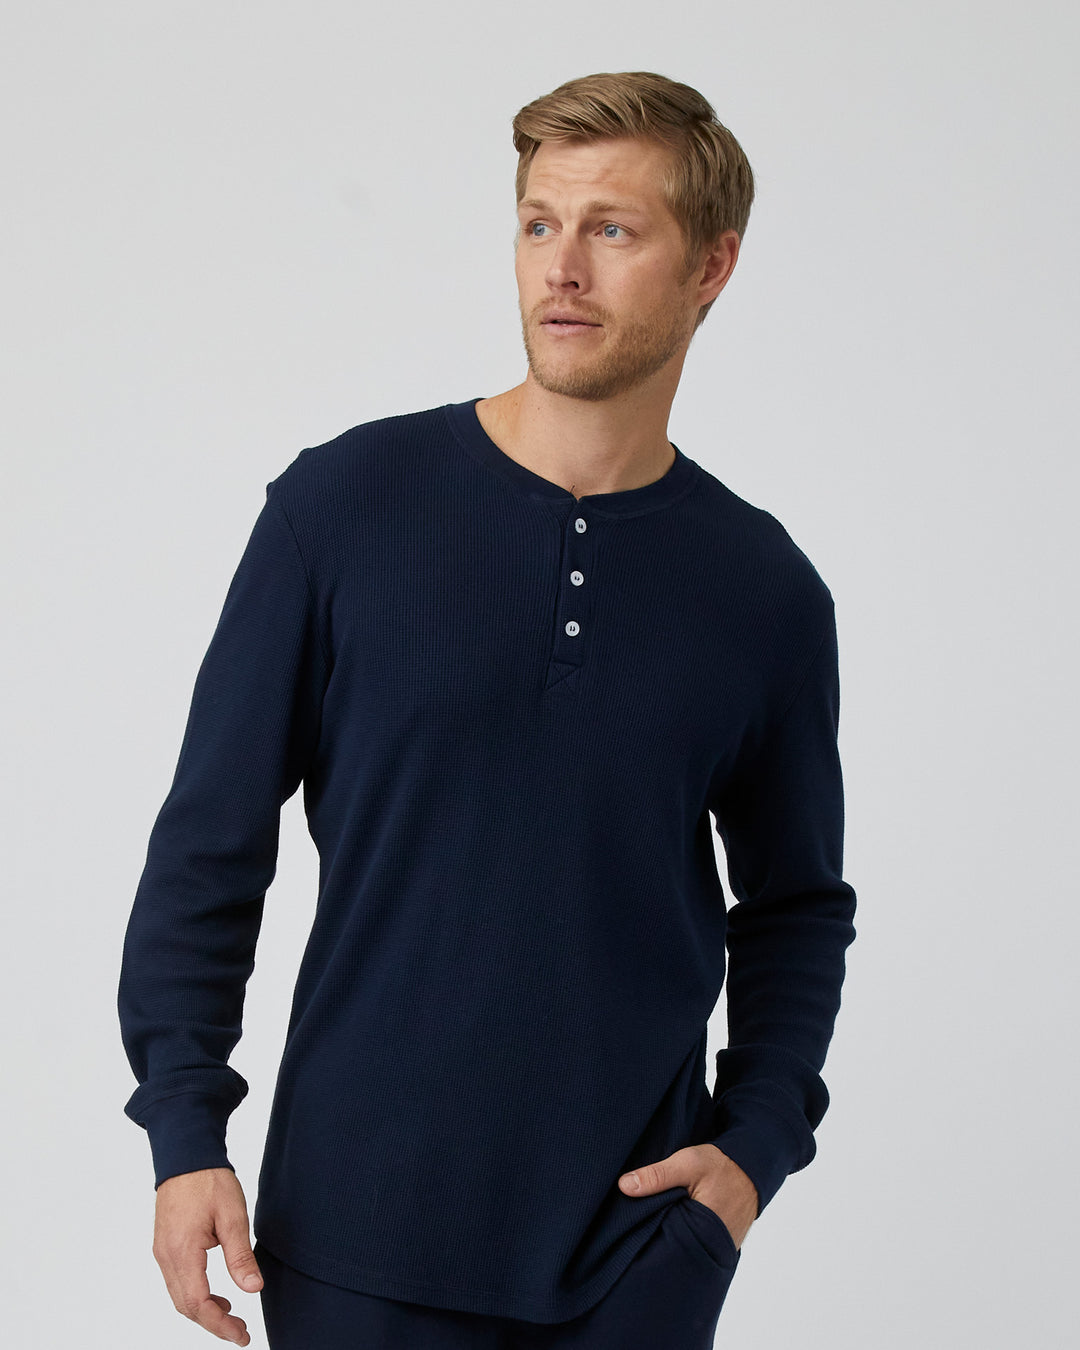 Vail Thermal Henley – The WHEAT Collection